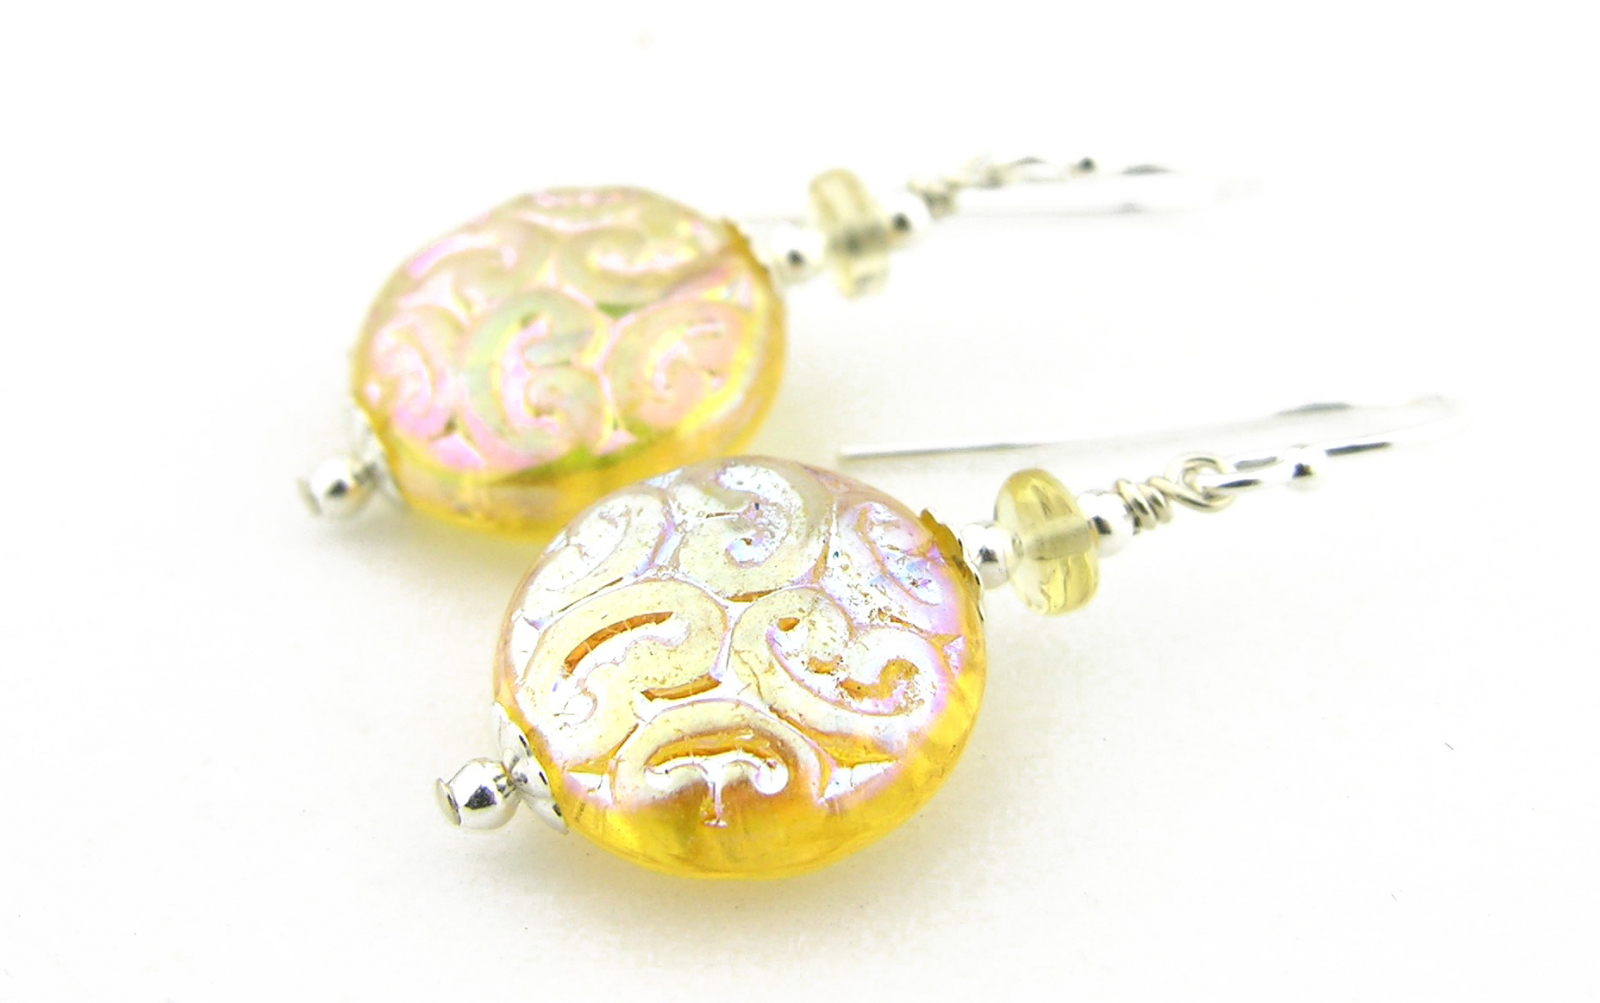 sunny scrolls earrings - Czech glass lentil in yellow with engraved scrolls, citrine and sterling silver